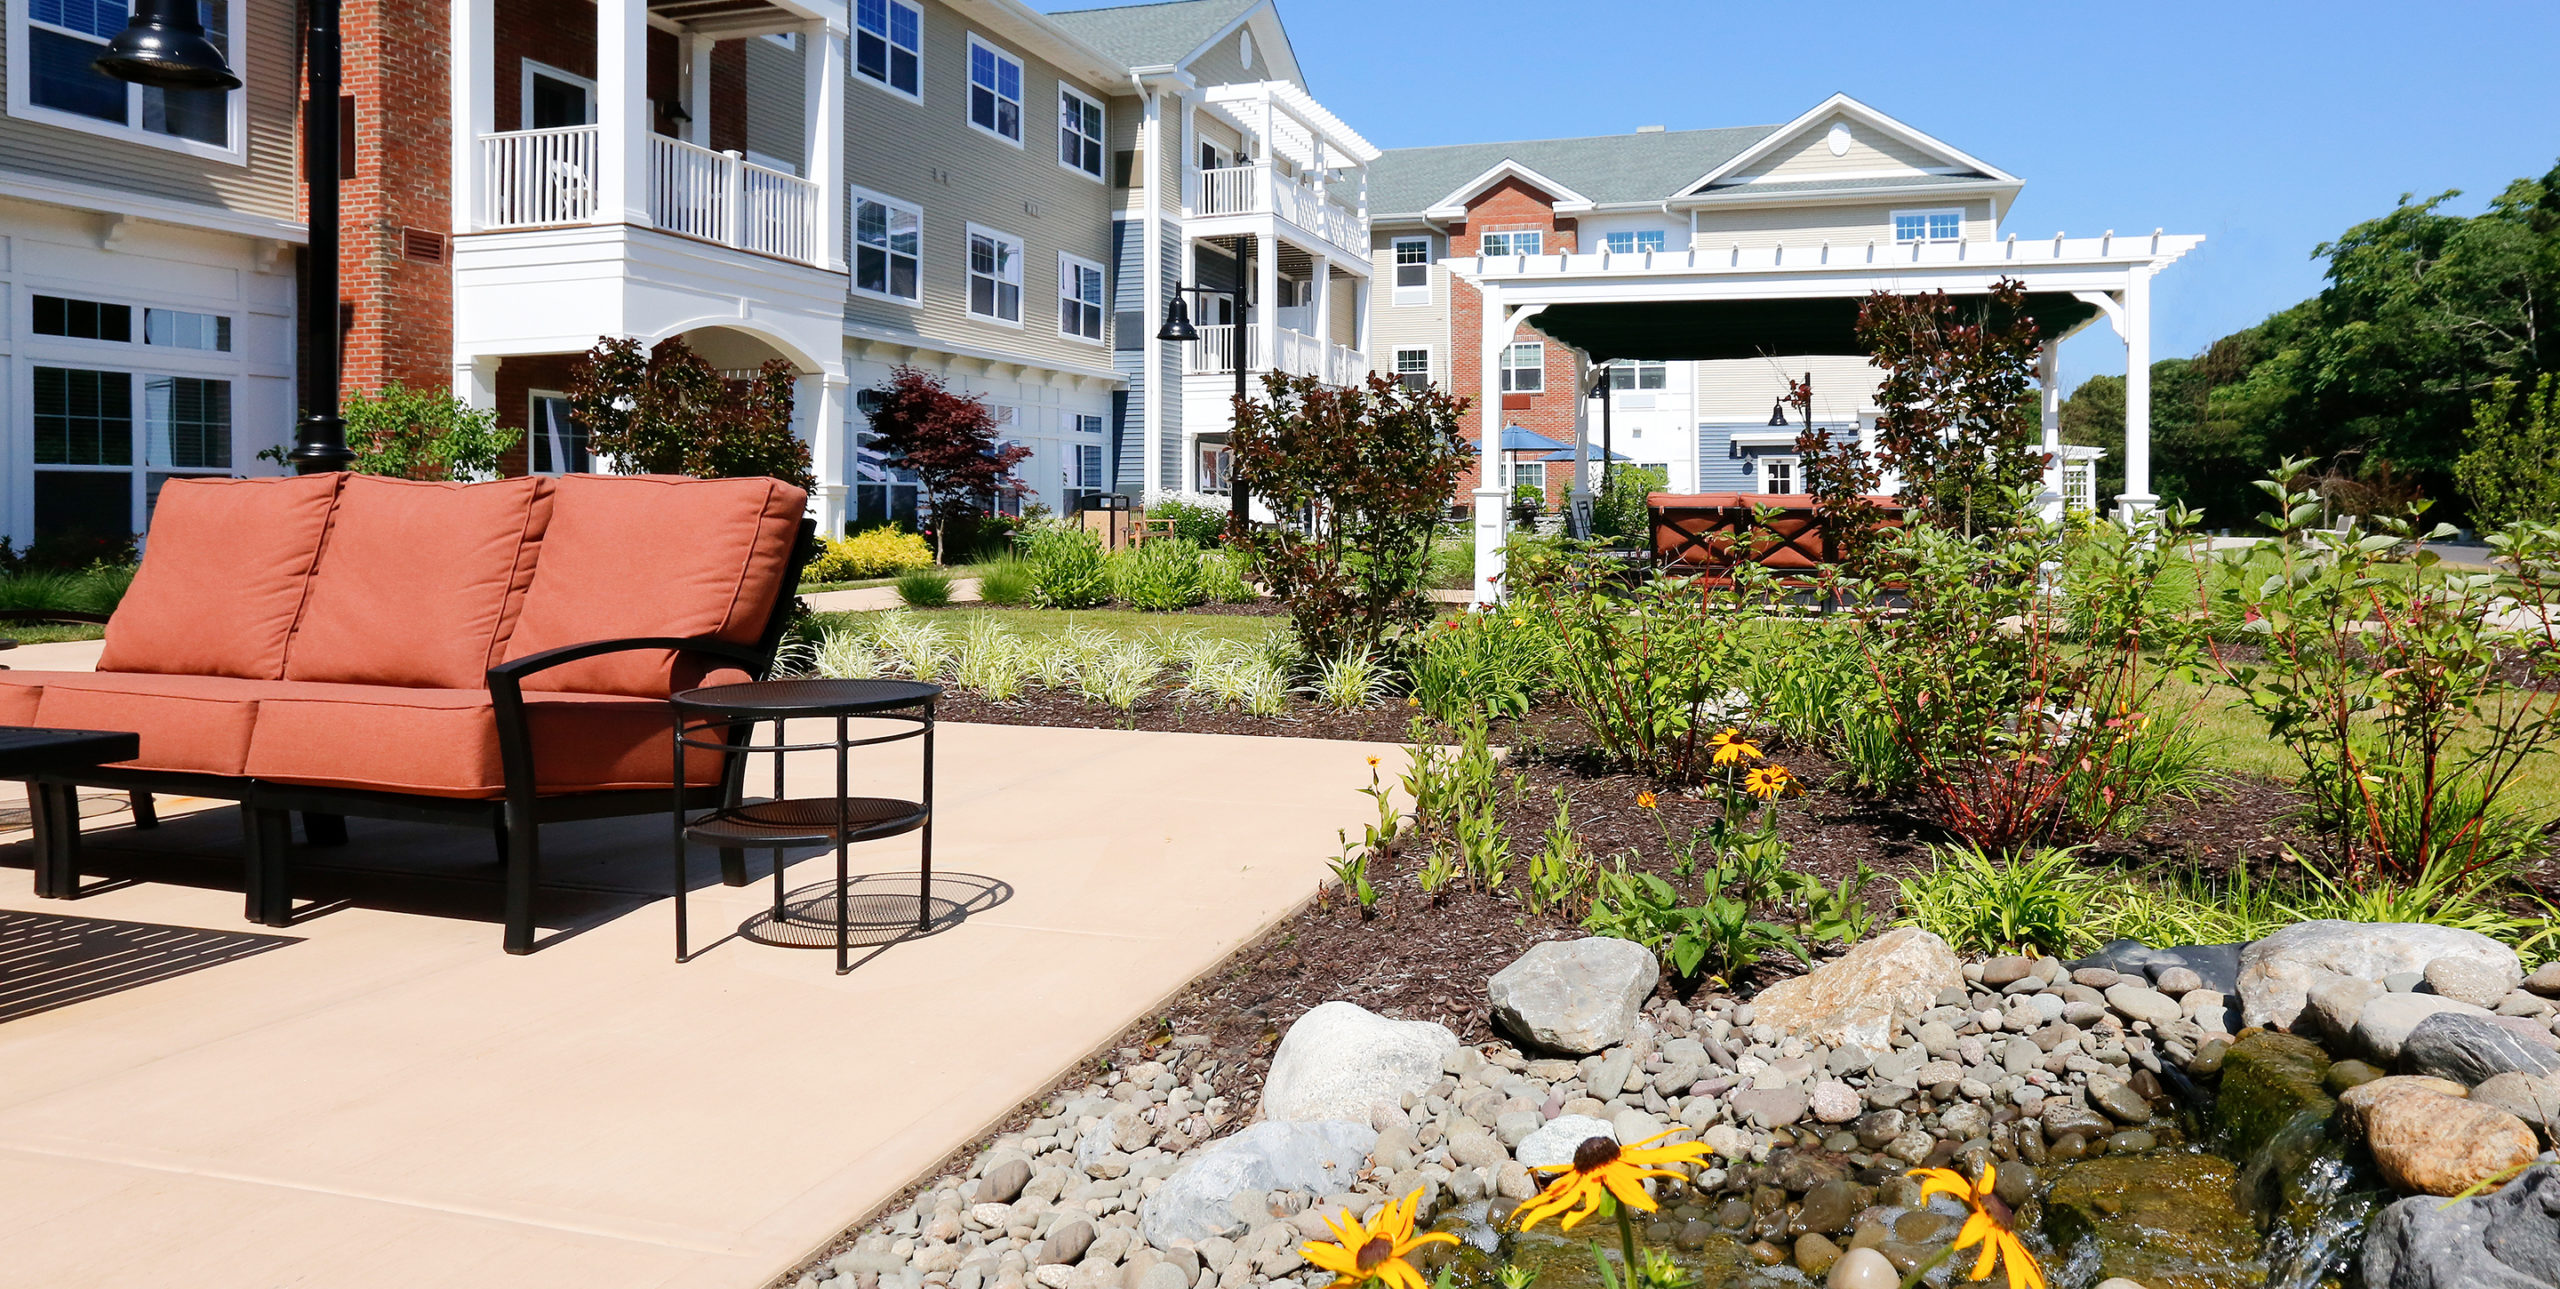 Courtyard area of Brightview Senior Living in Sayville, NY